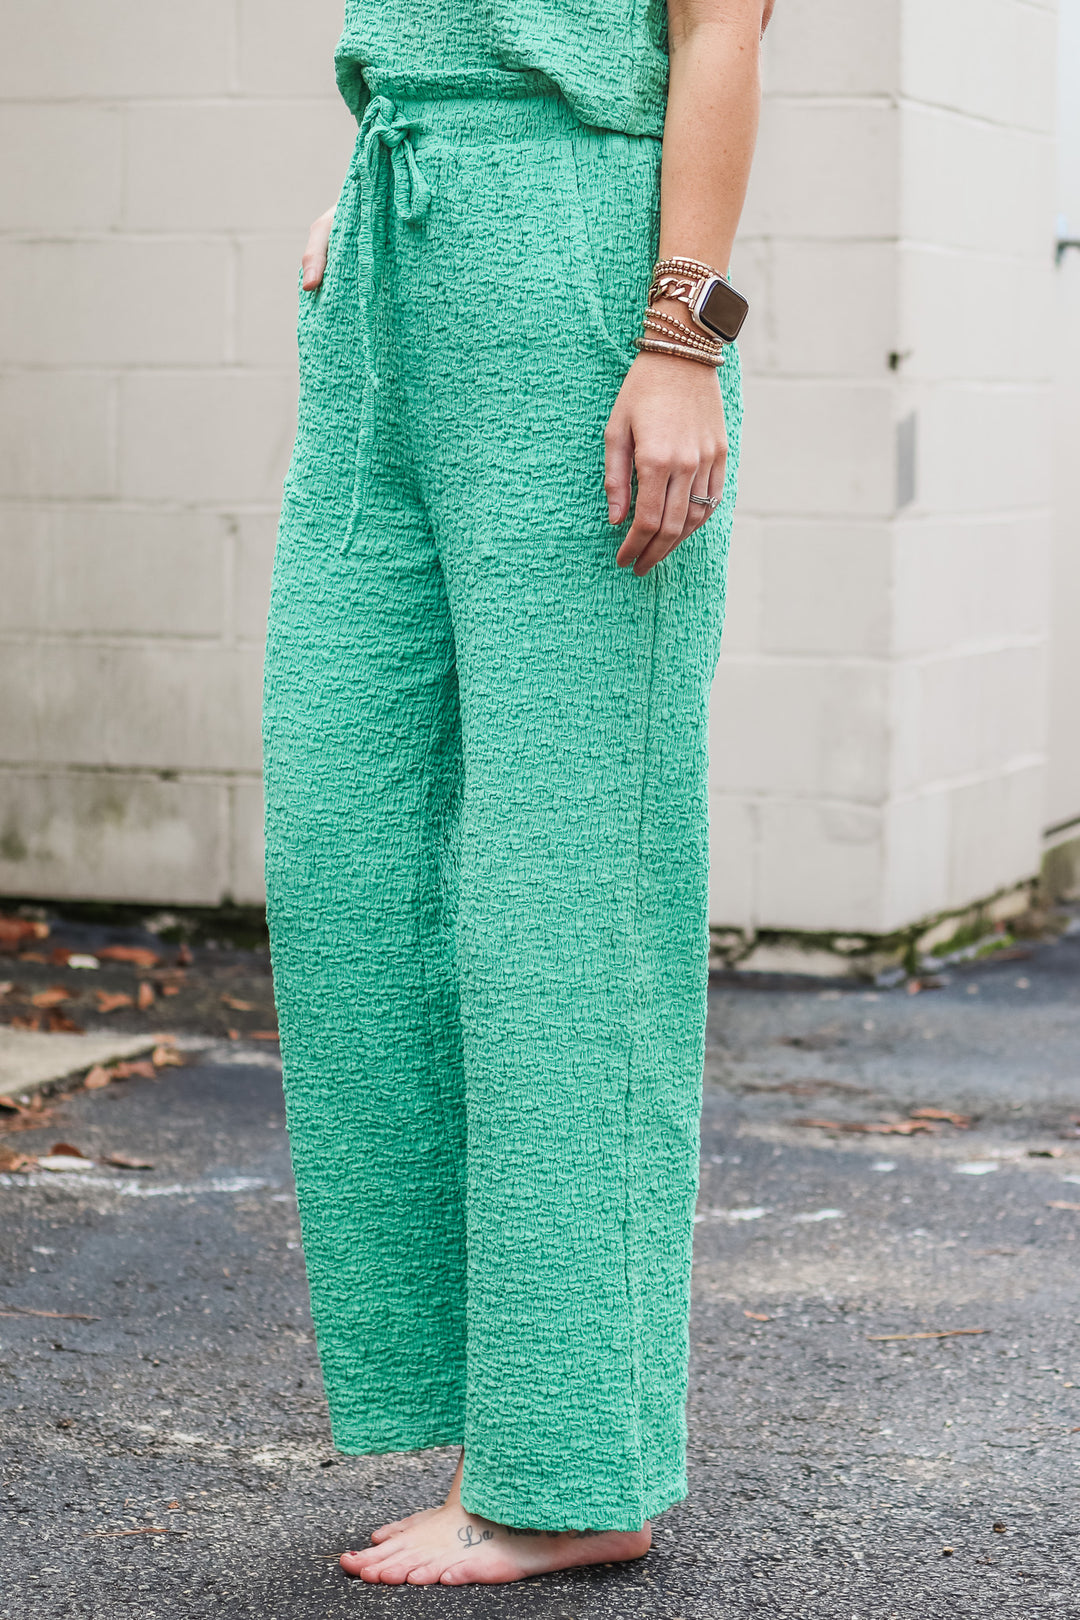 Cozy Lounge Pants - Boutique Laurie and Company